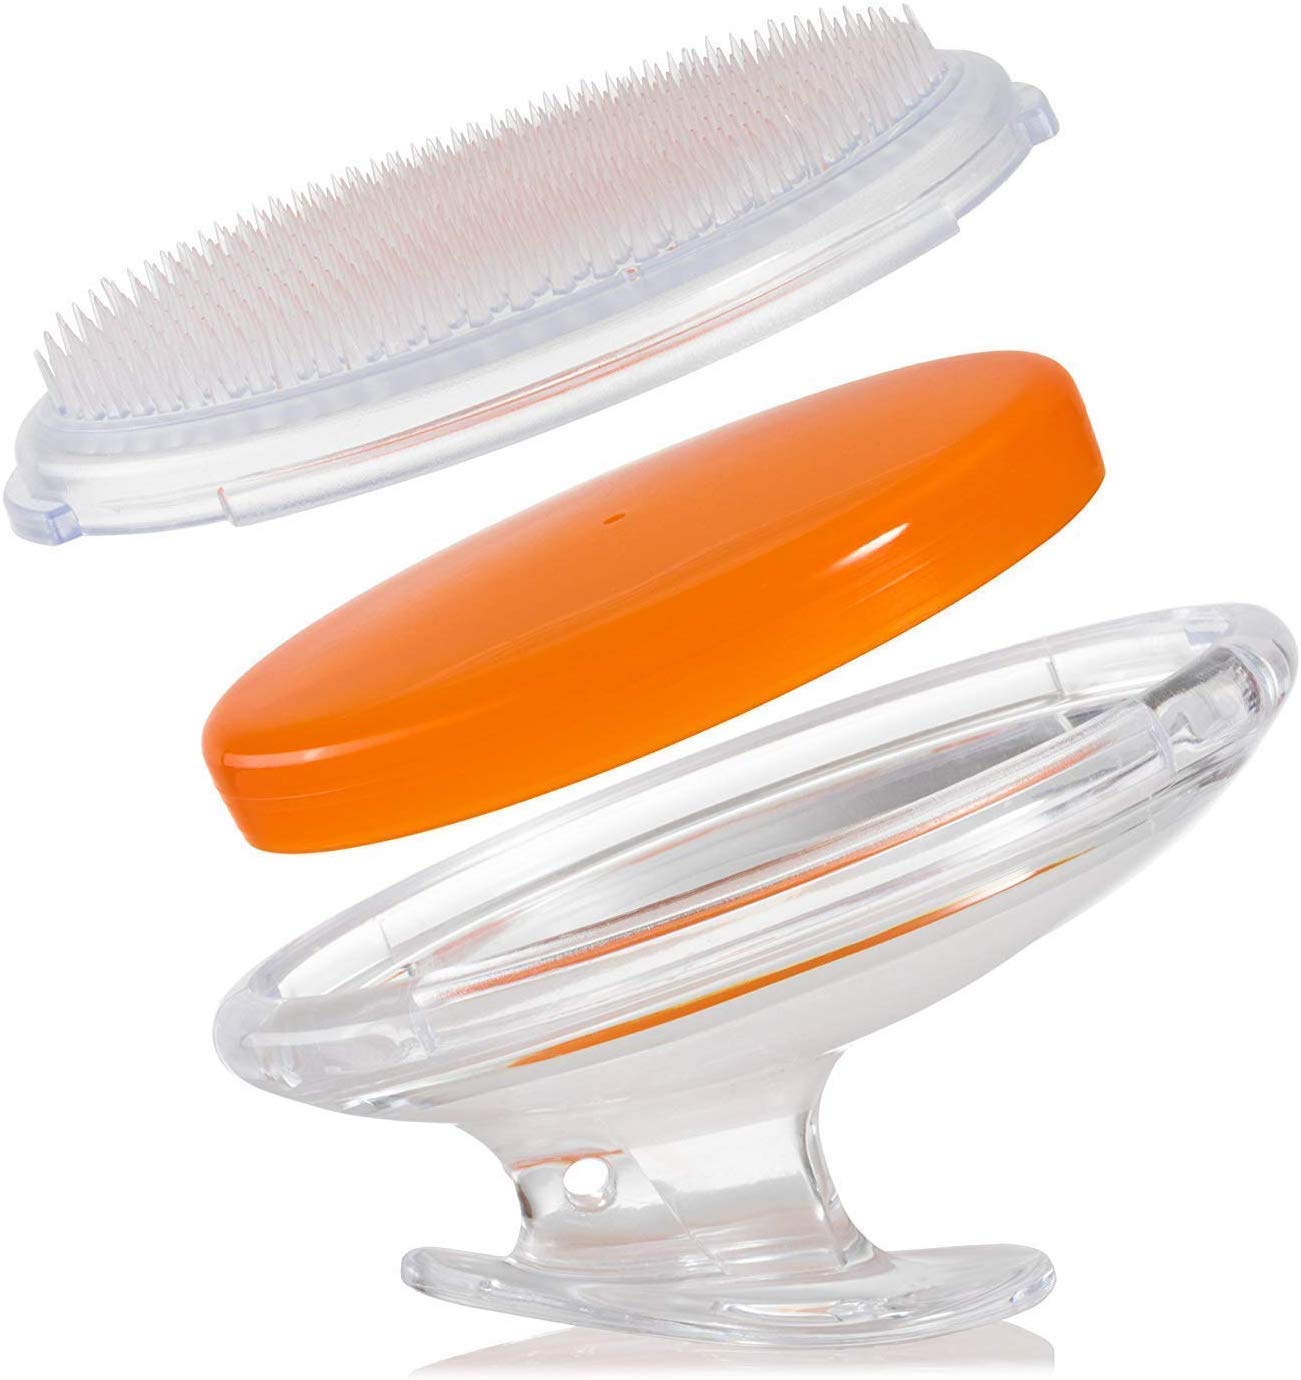 Exfoliating Brush to Treat and Prevent Razor Bumps and Ingrown Hairs  - Like New